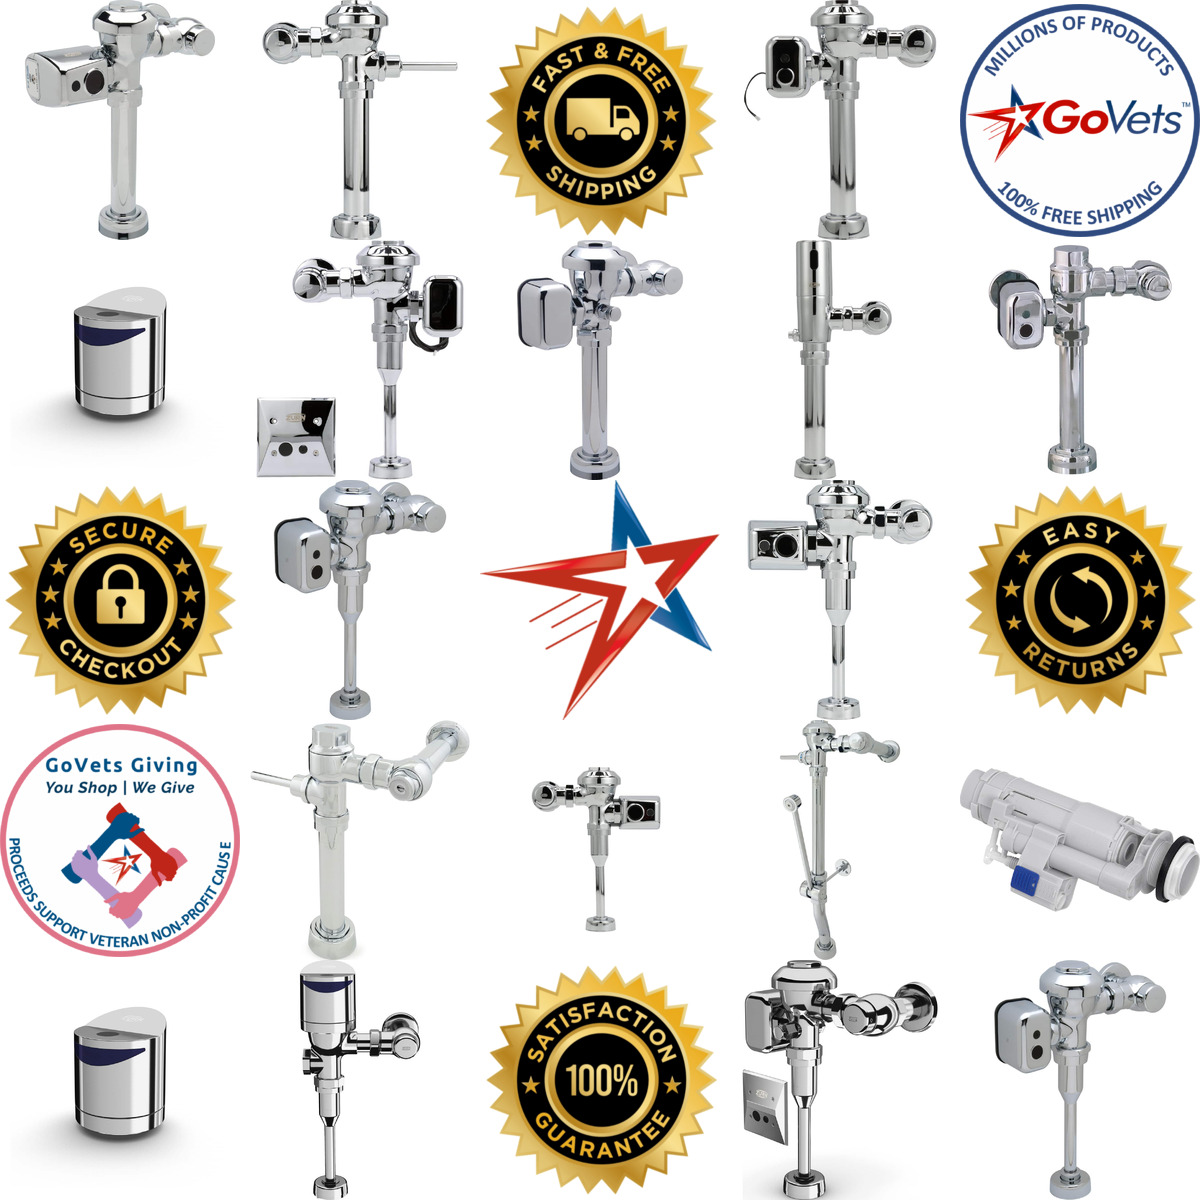 A selection of Flush Valves products on GoVets